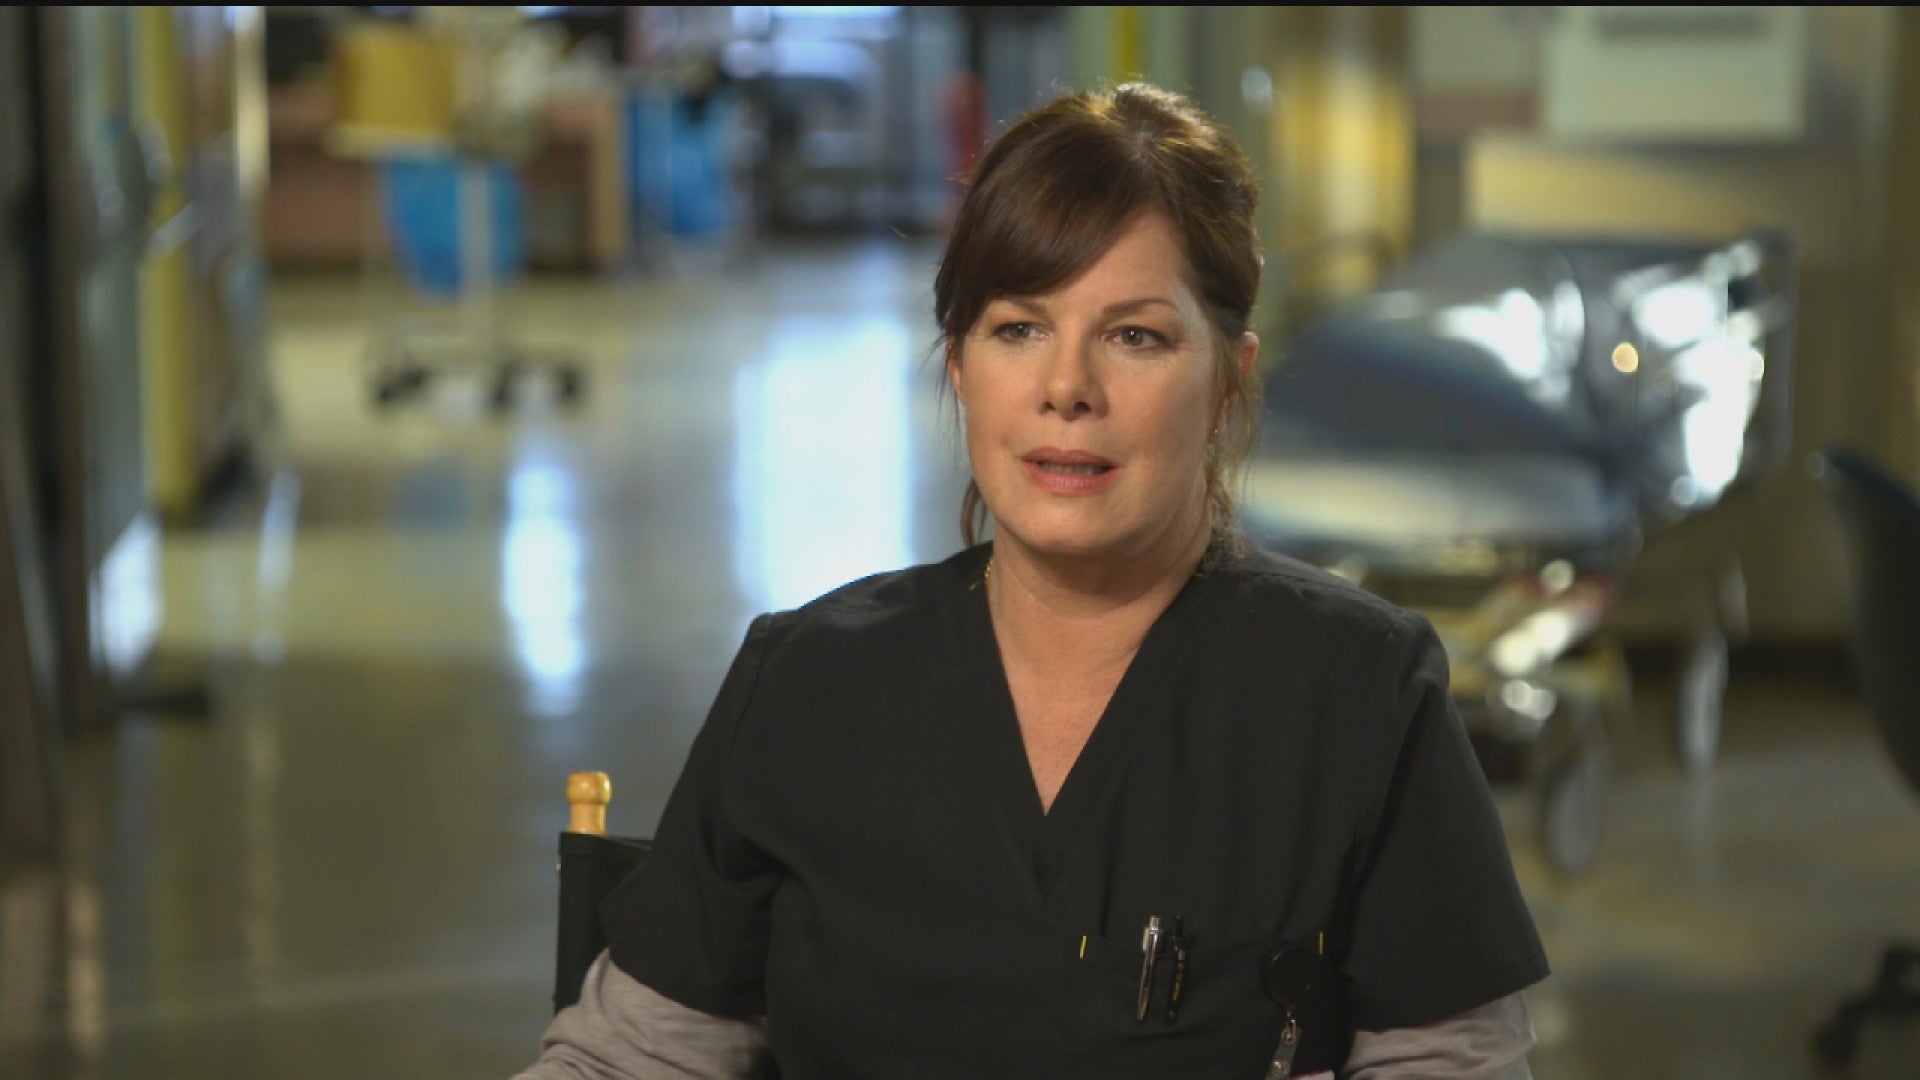 why did code black get rid of marcia gay harden 2016